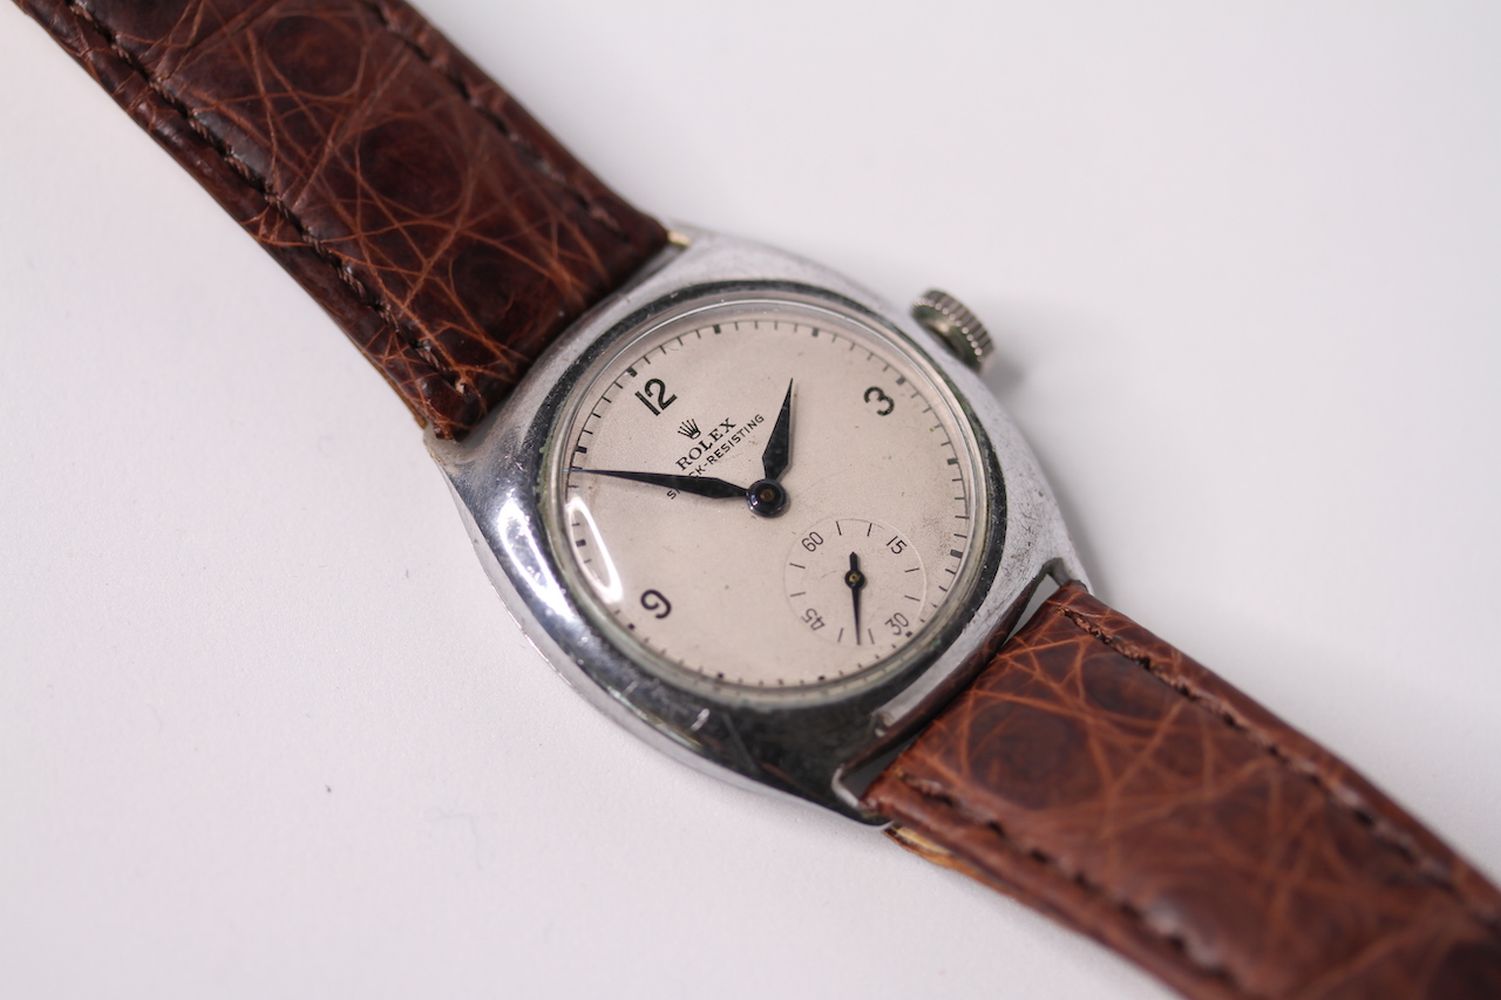 VINTAGE 1925 ROLEX SHOCK RESISTING REFERENCE 3892, white dial with black Arabic numerals, subsidiary